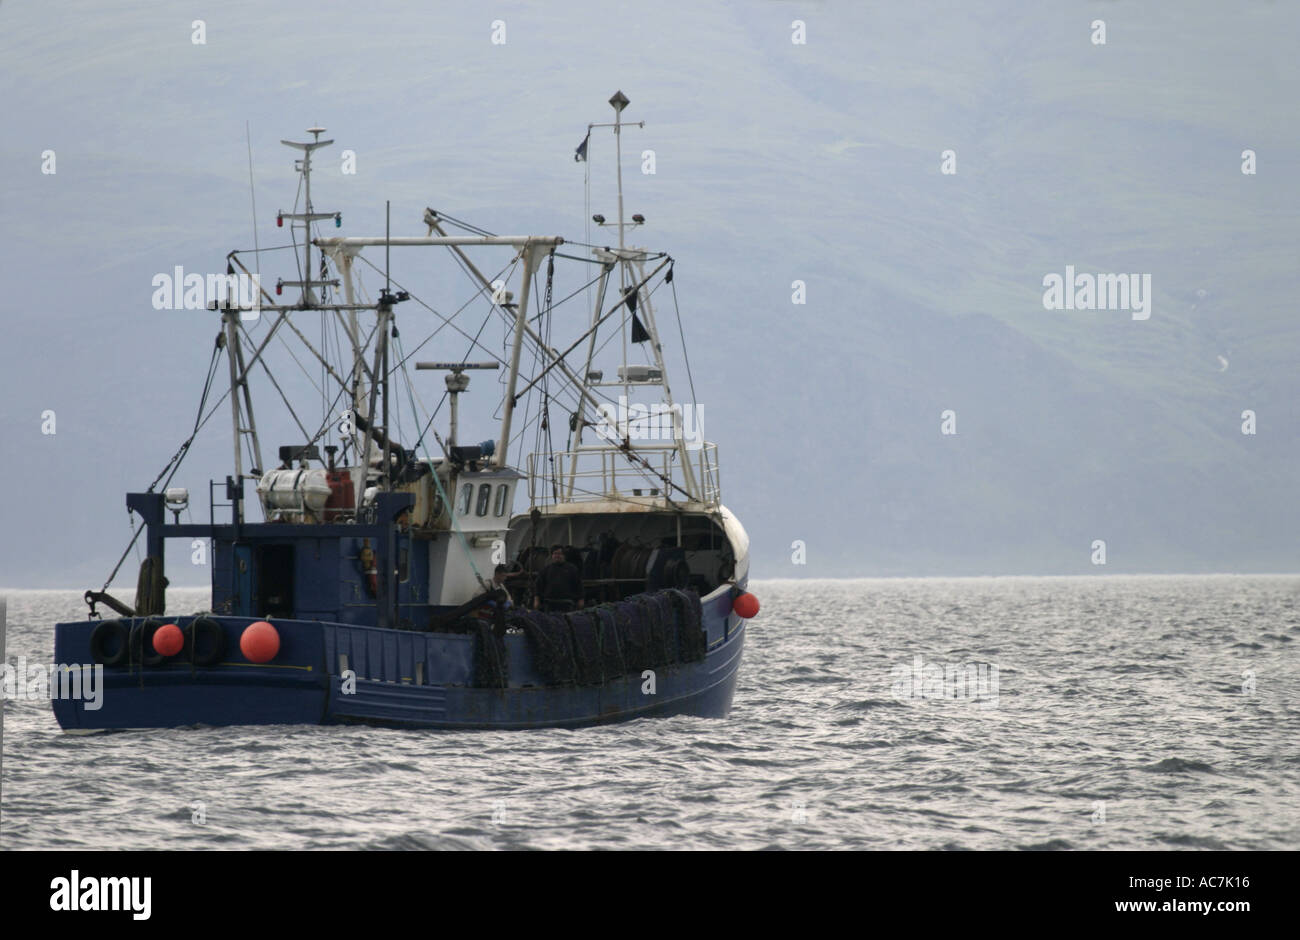 A scallop dredger operating in the Firth of Lorne off the West Coast of Scotland Stock Photo